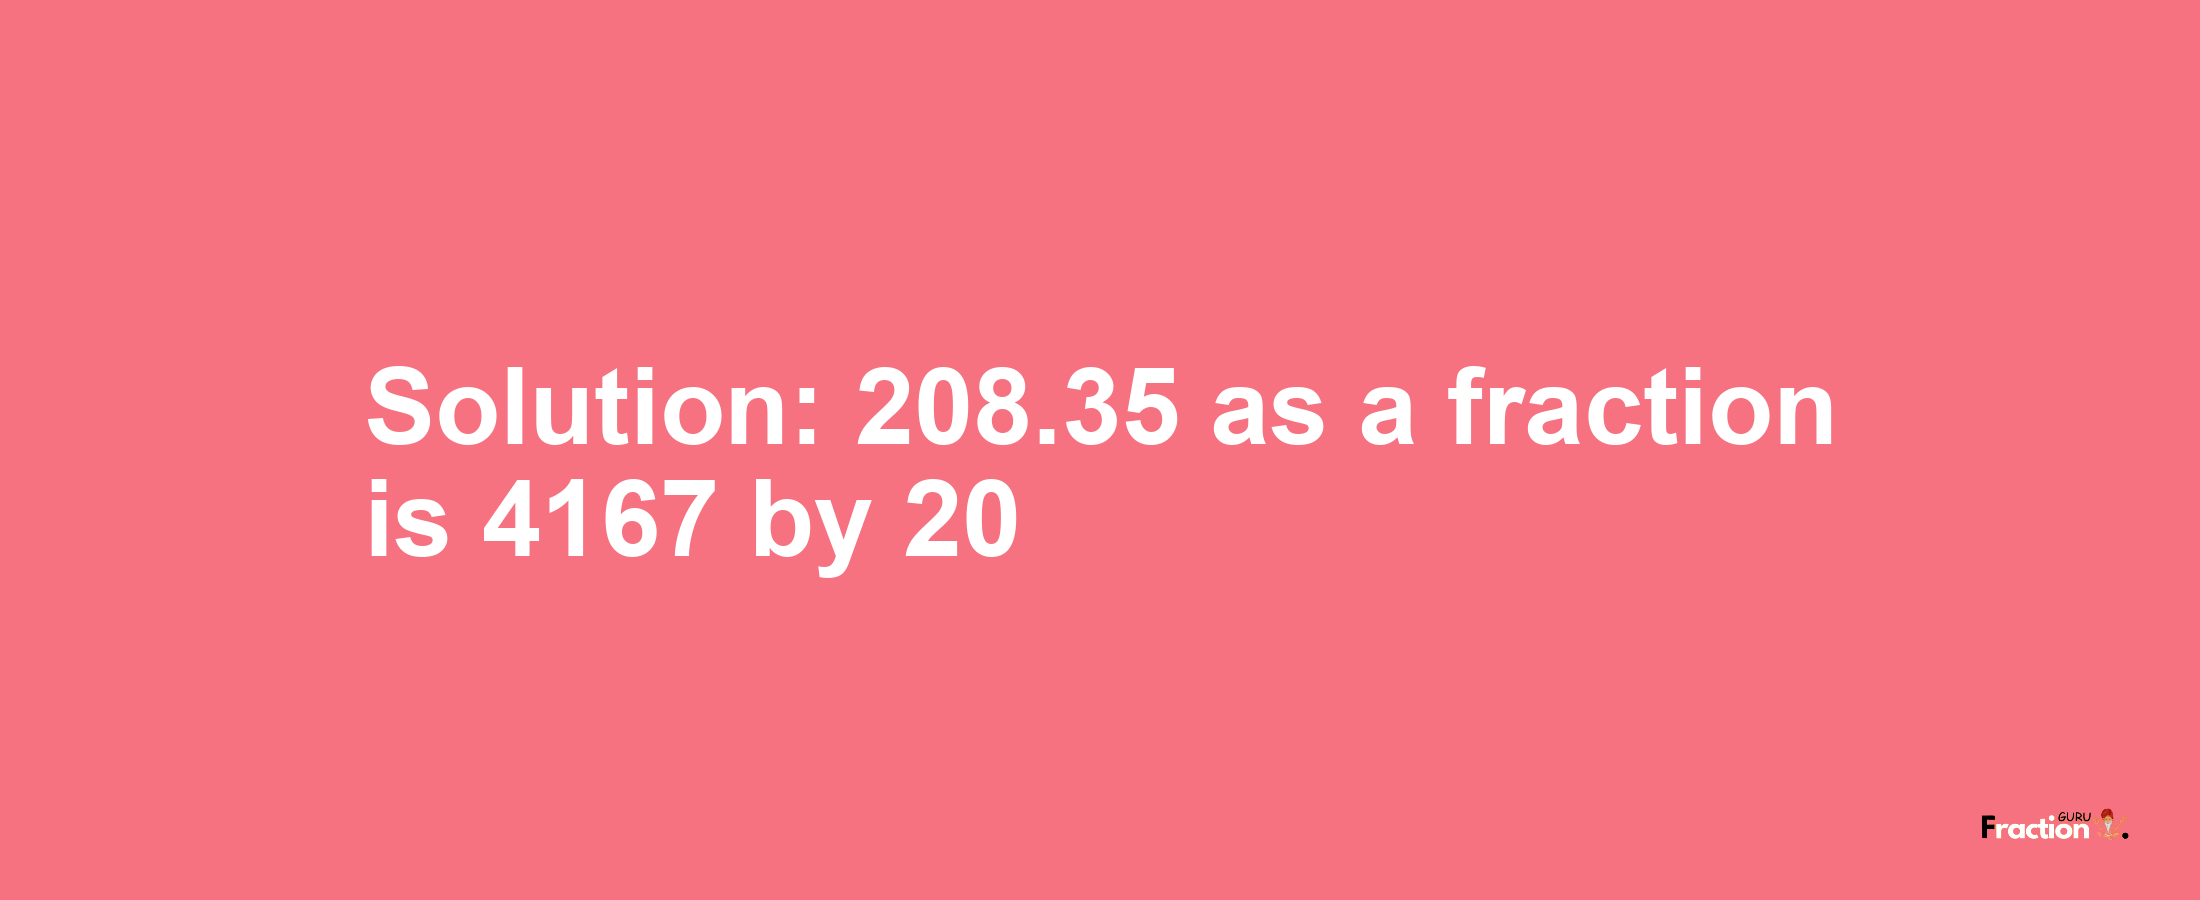 Solution:208.35 as a fraction is 4167/20